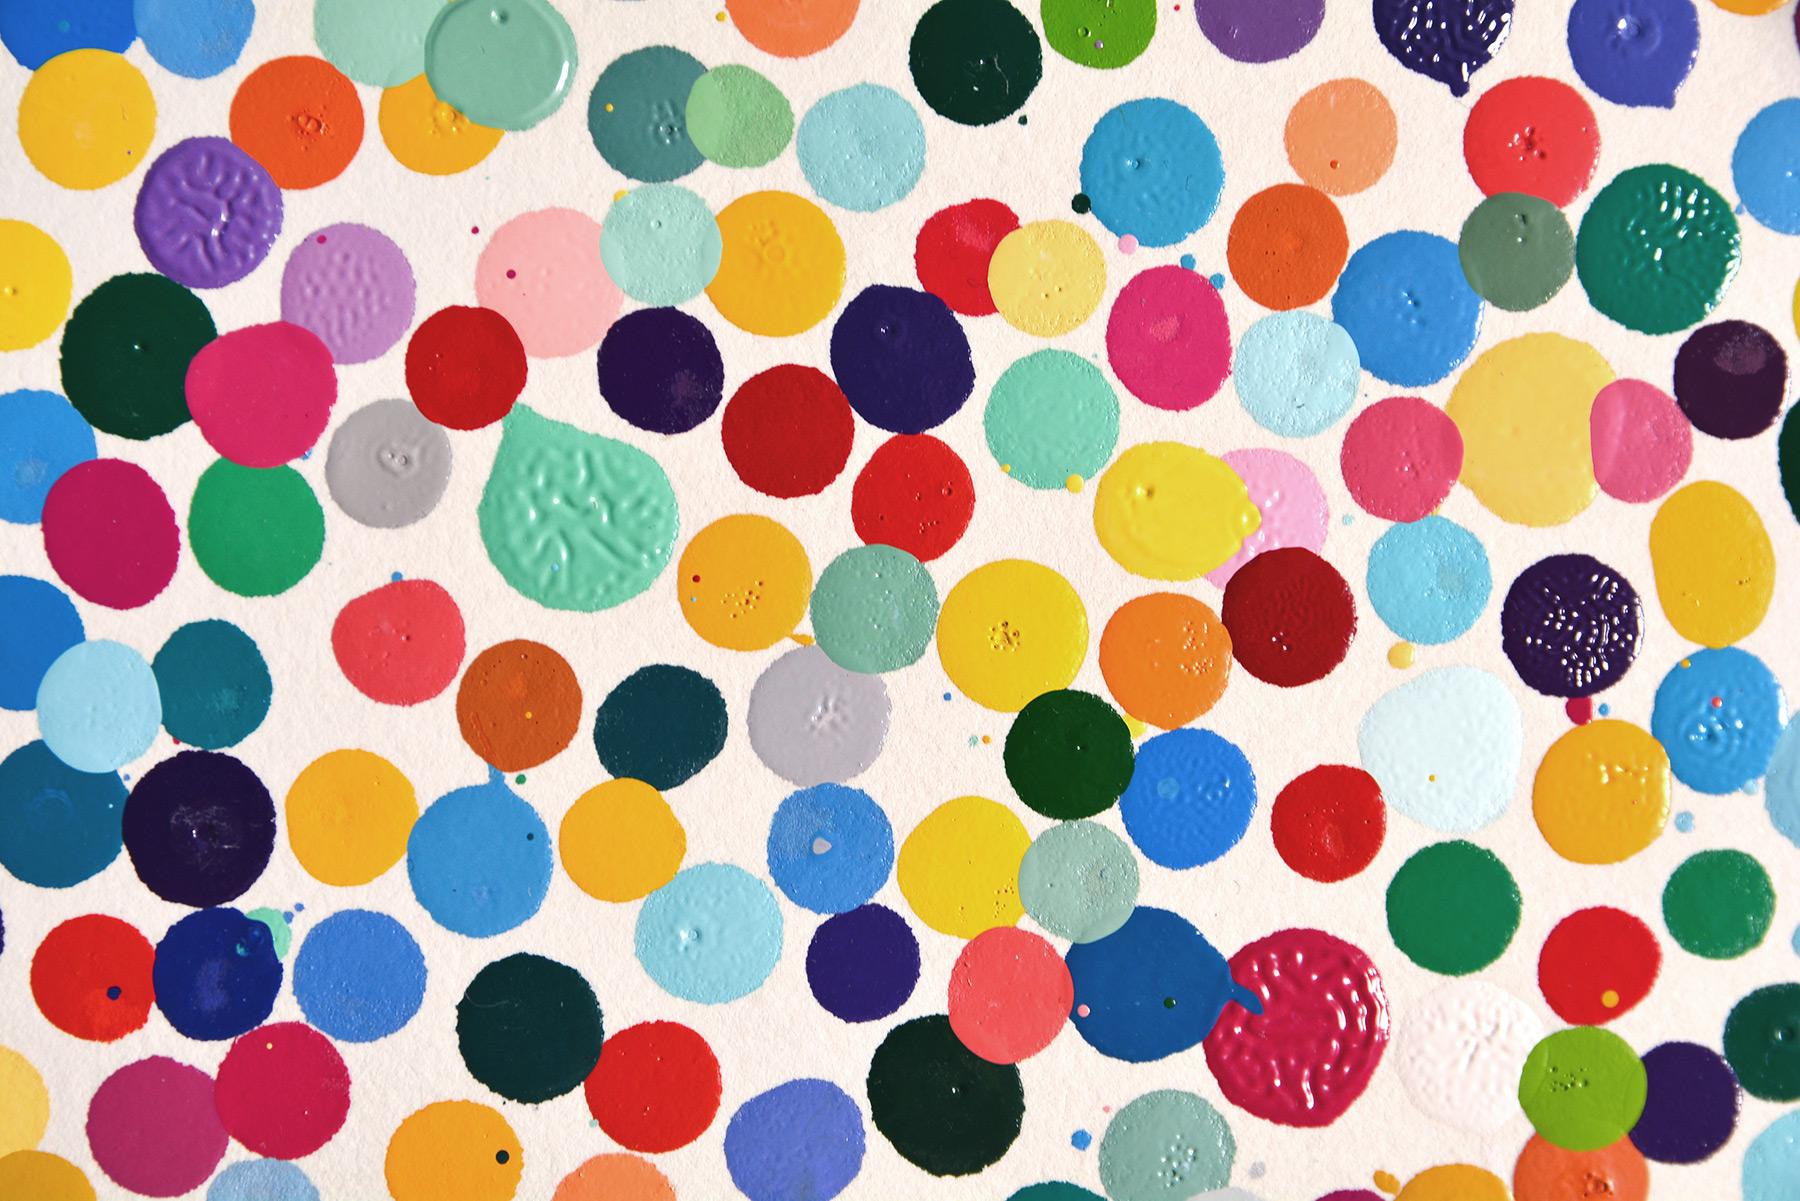 DAMIEN HIRST - THE CURRENCY. Original work The Currency Project. Dots. Colors 3